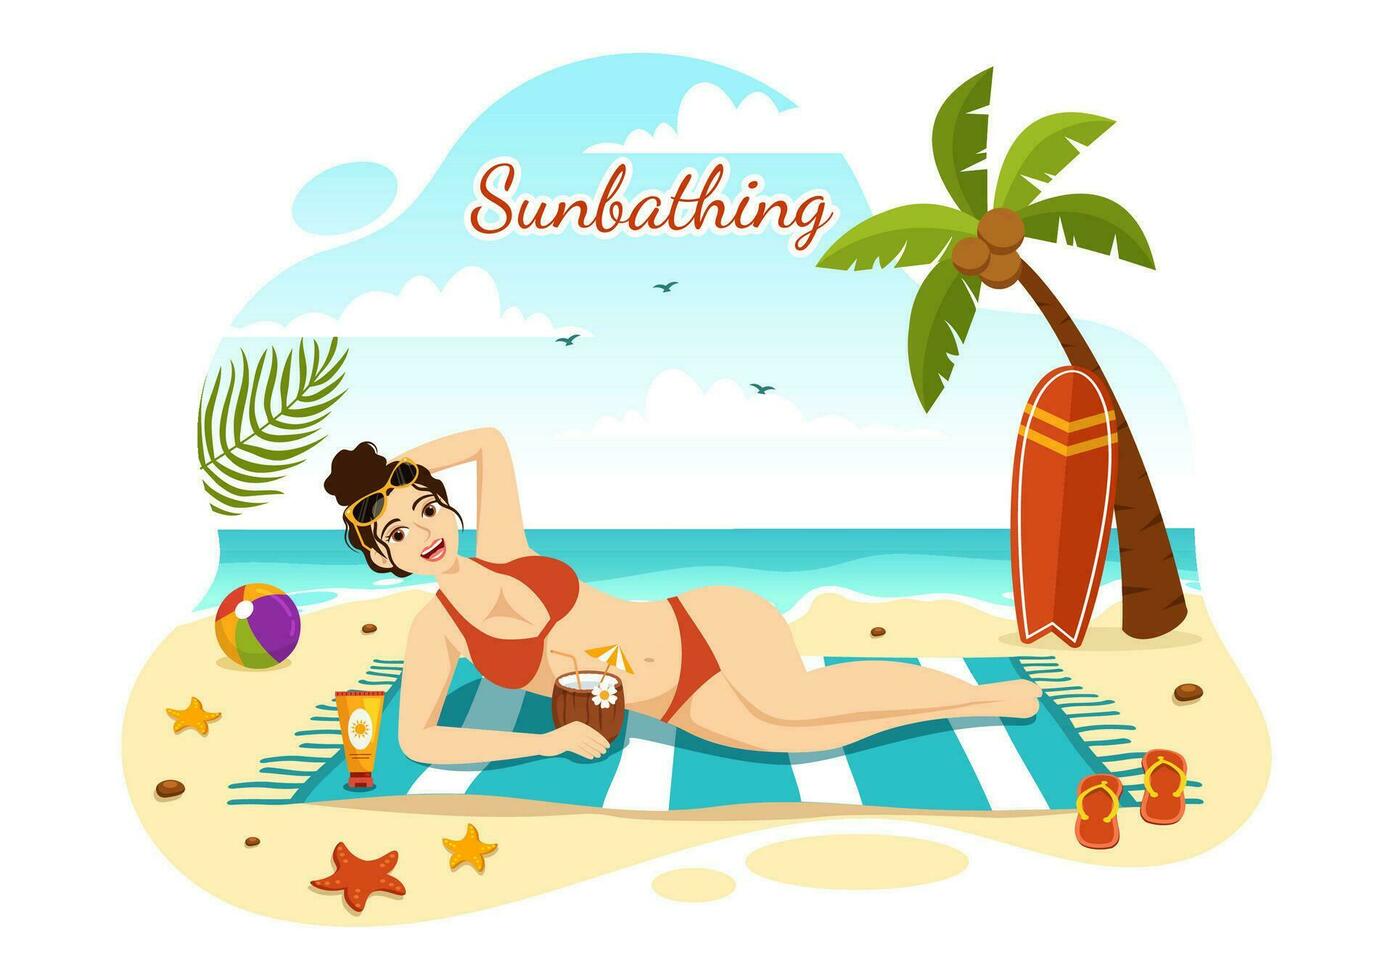 Sunbathing Vector Illustration of People Lying on Chaise Lounge and Relaxing on Beach Summer Holidays in  Flat Cartoon Hand Drawn Templates